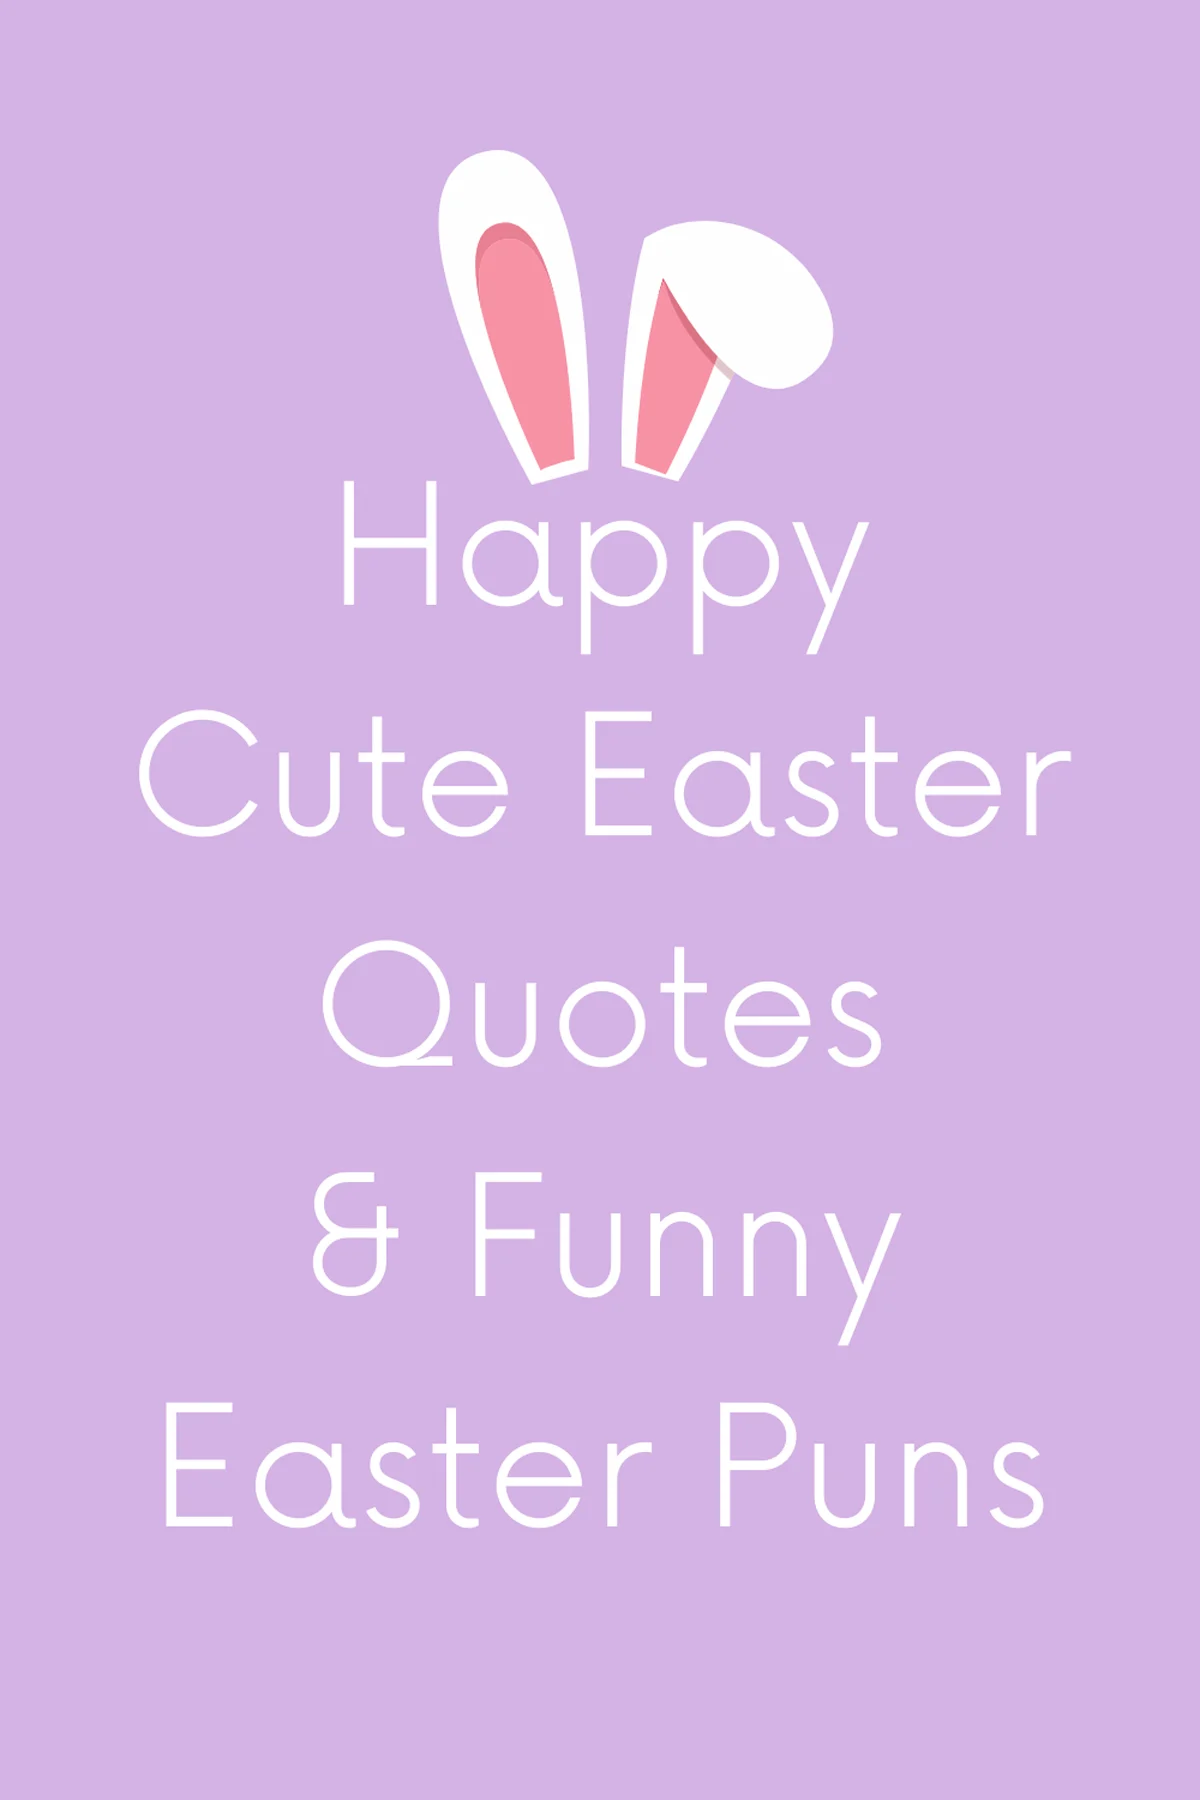 Religious Captions For Easter